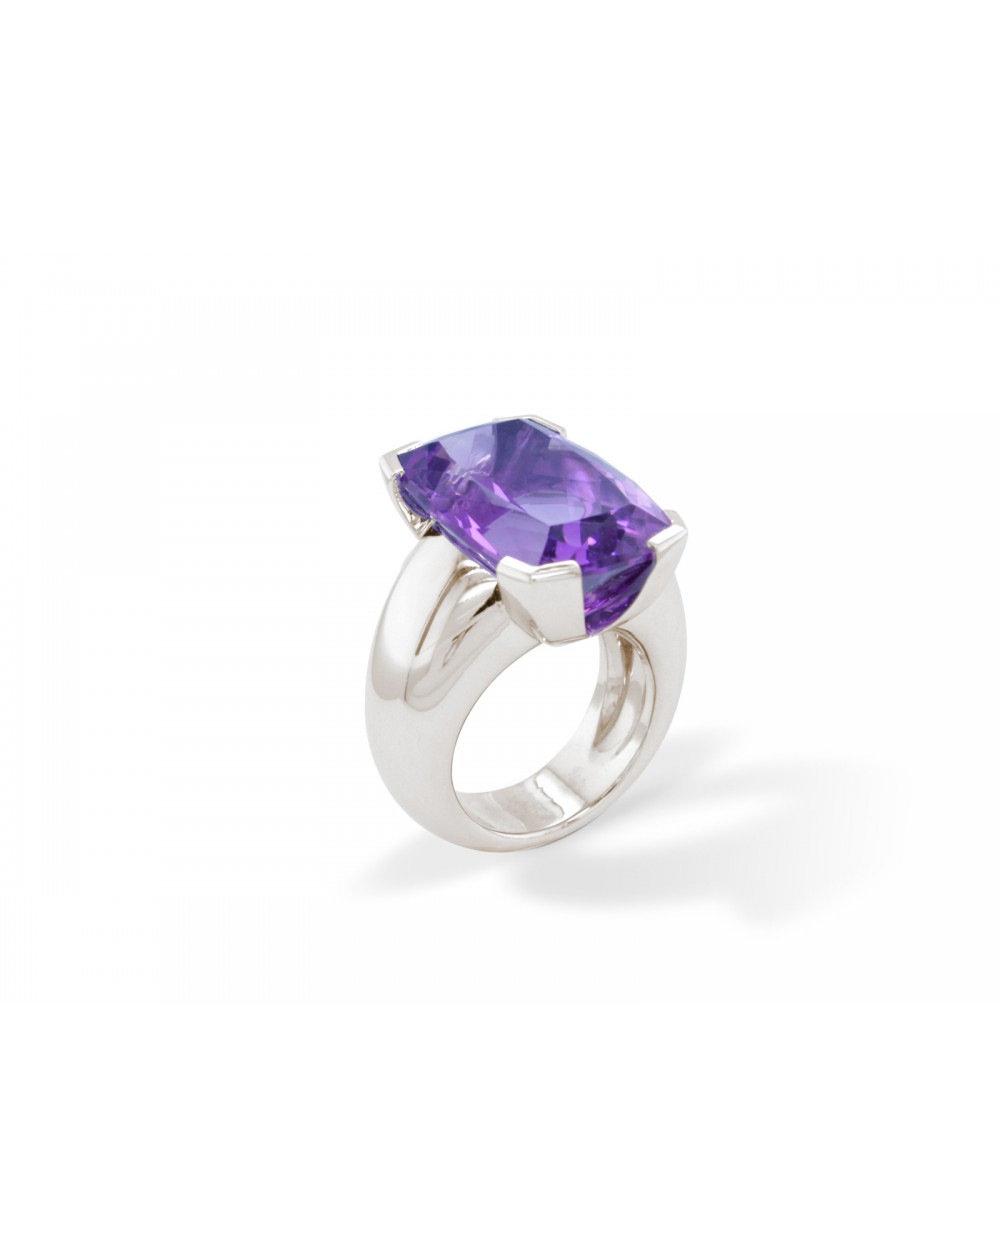 White gold and amethyst ring